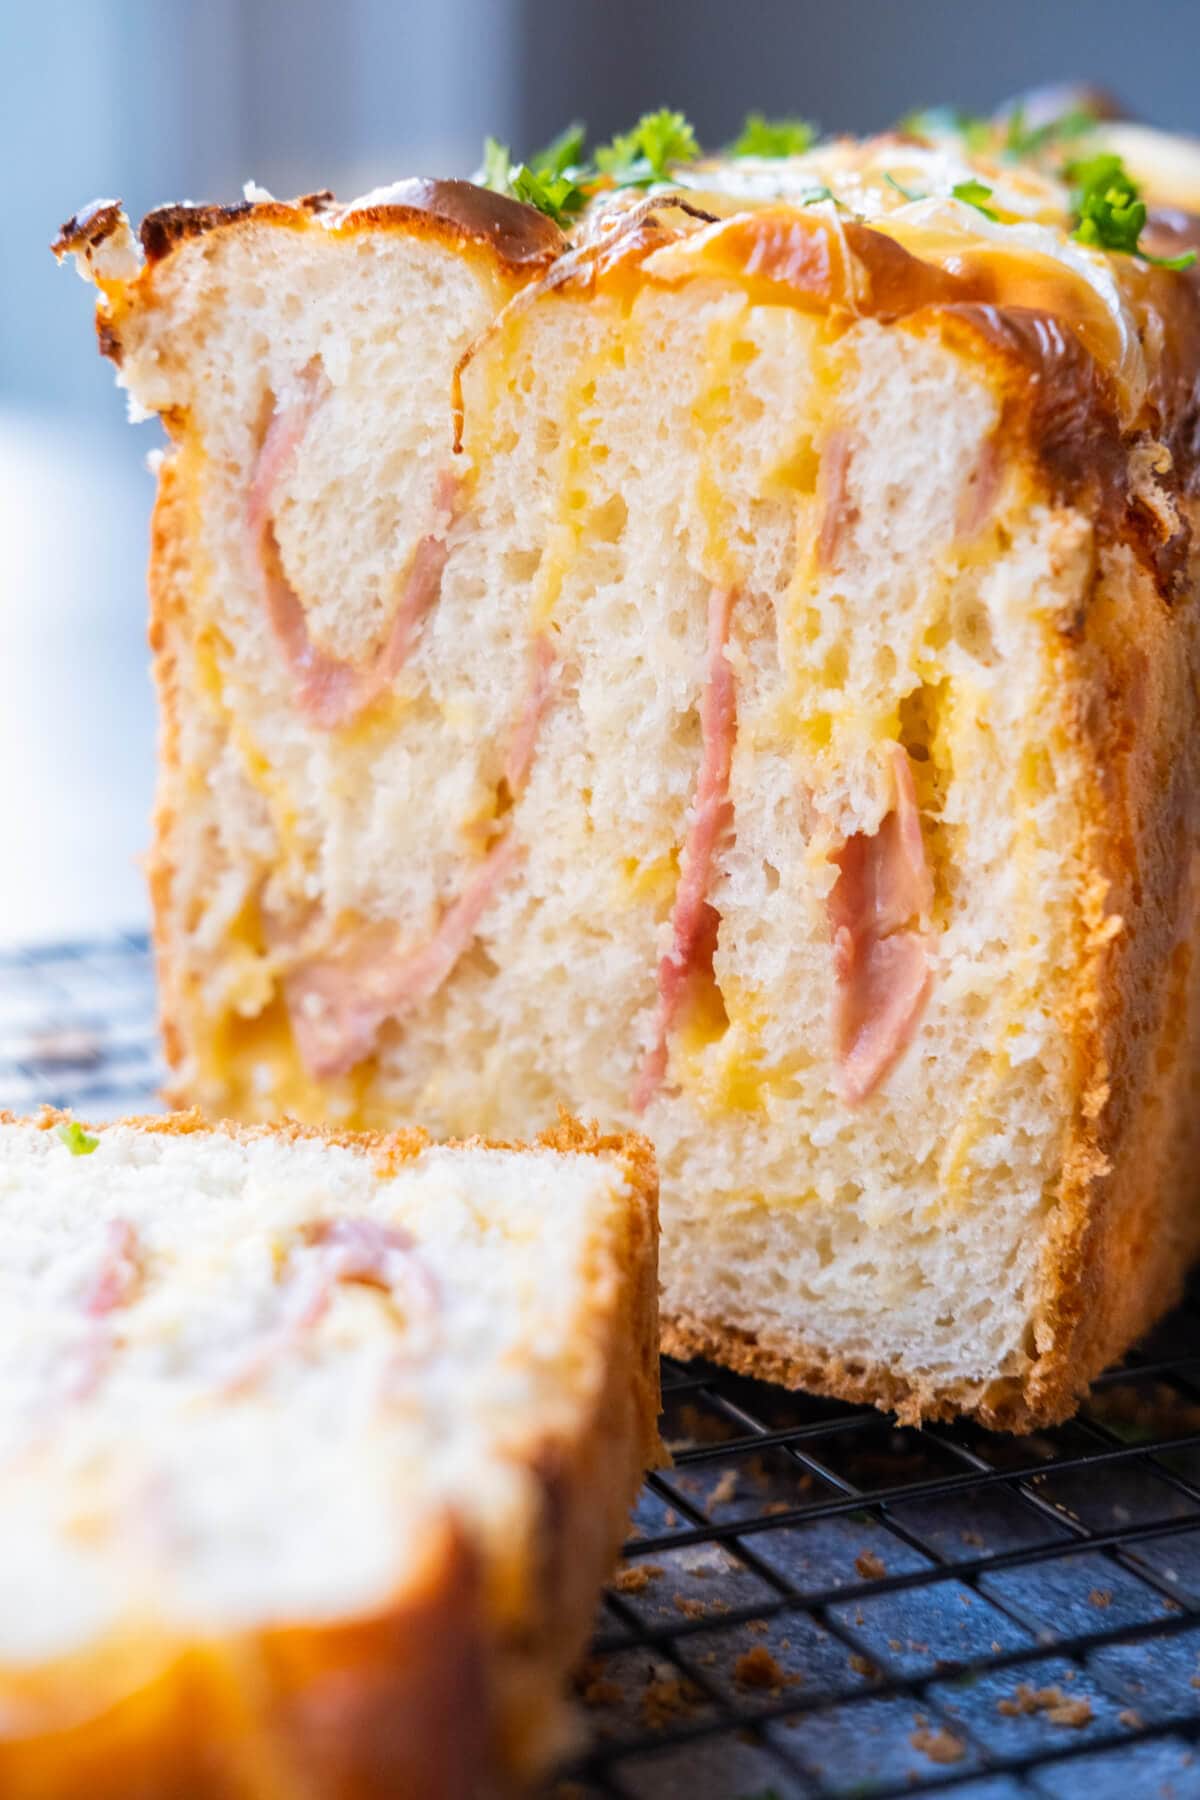 One loaf of bread with golden brown crust sliced into tempting pieces reveals the savory filling of ham and melted cheese.